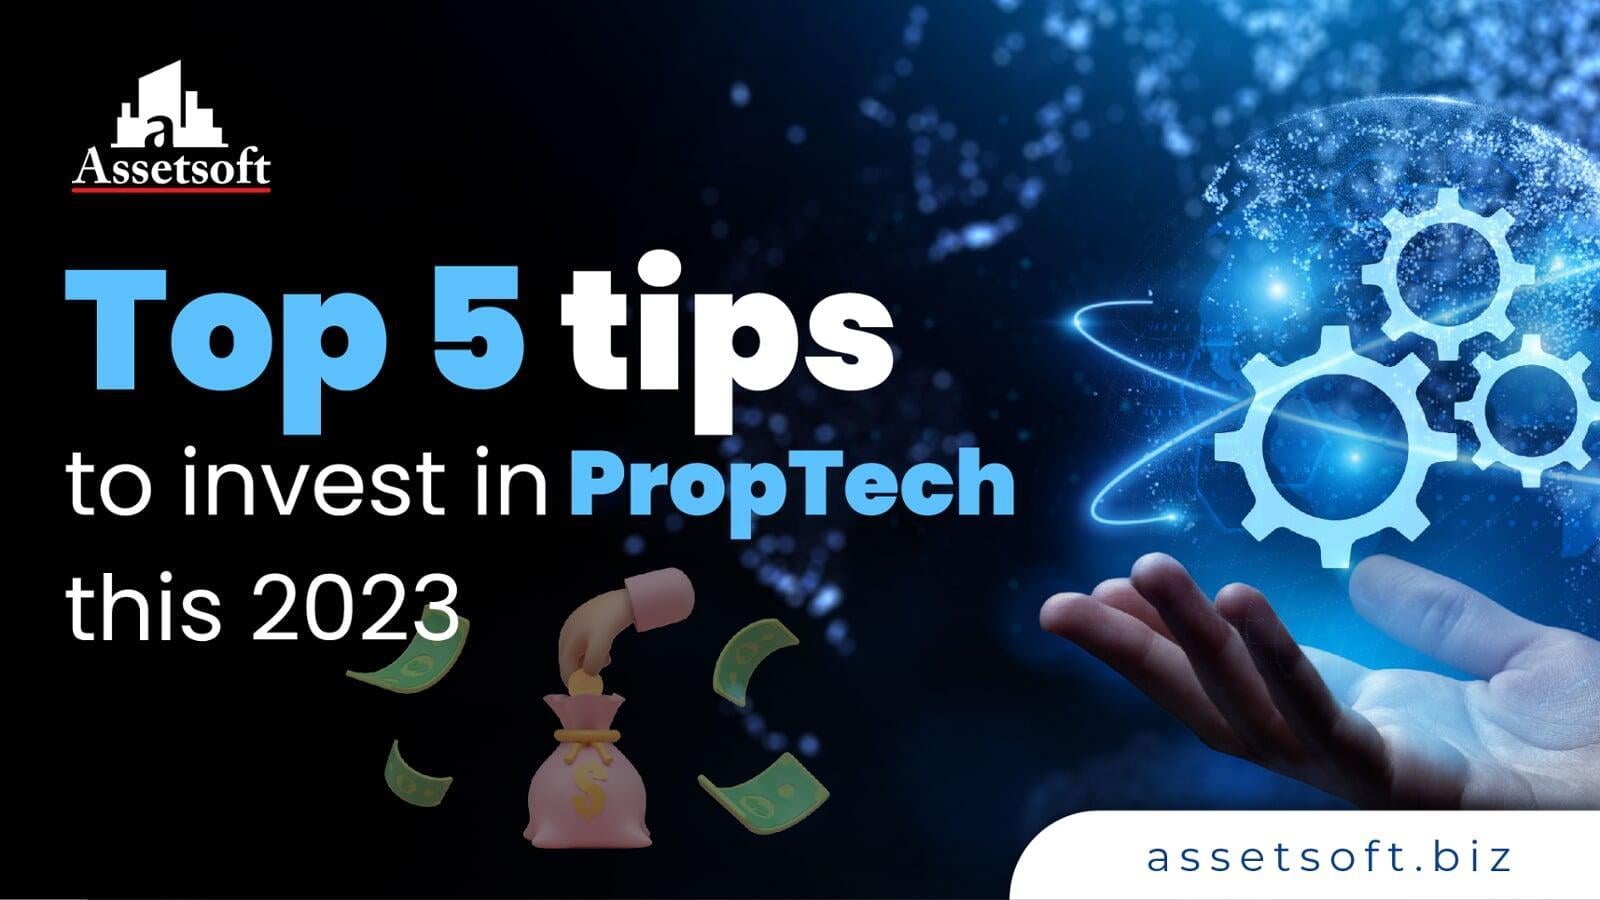 Top 5 tips to invest in PropTech this 2023 